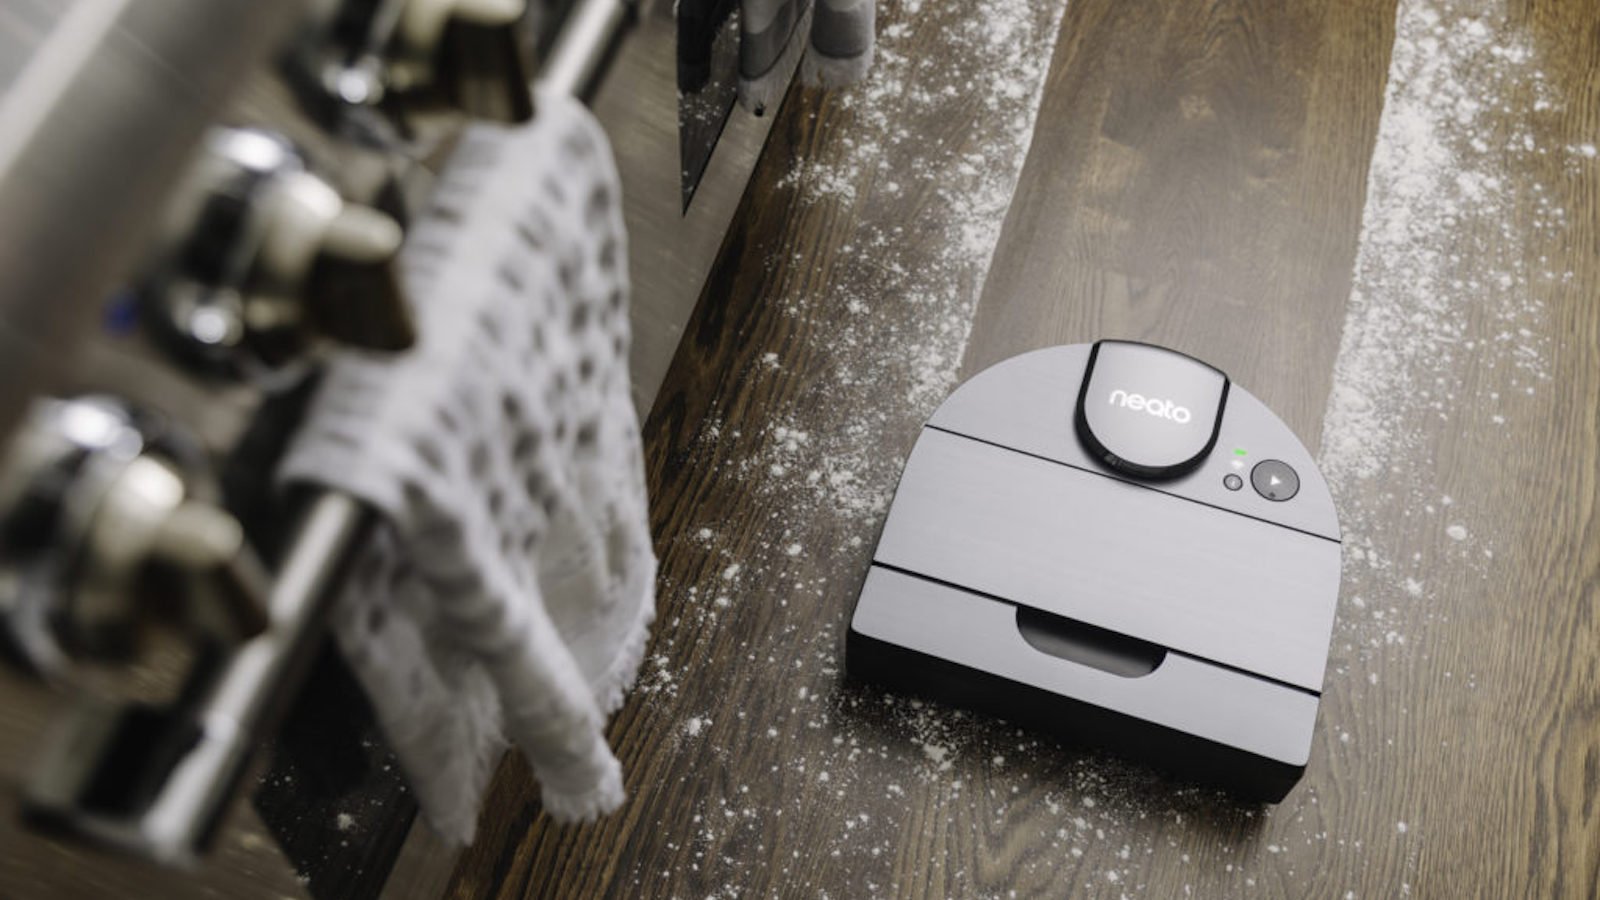 Neato D Series robotic vacuums capture up to 99.97% of allergens